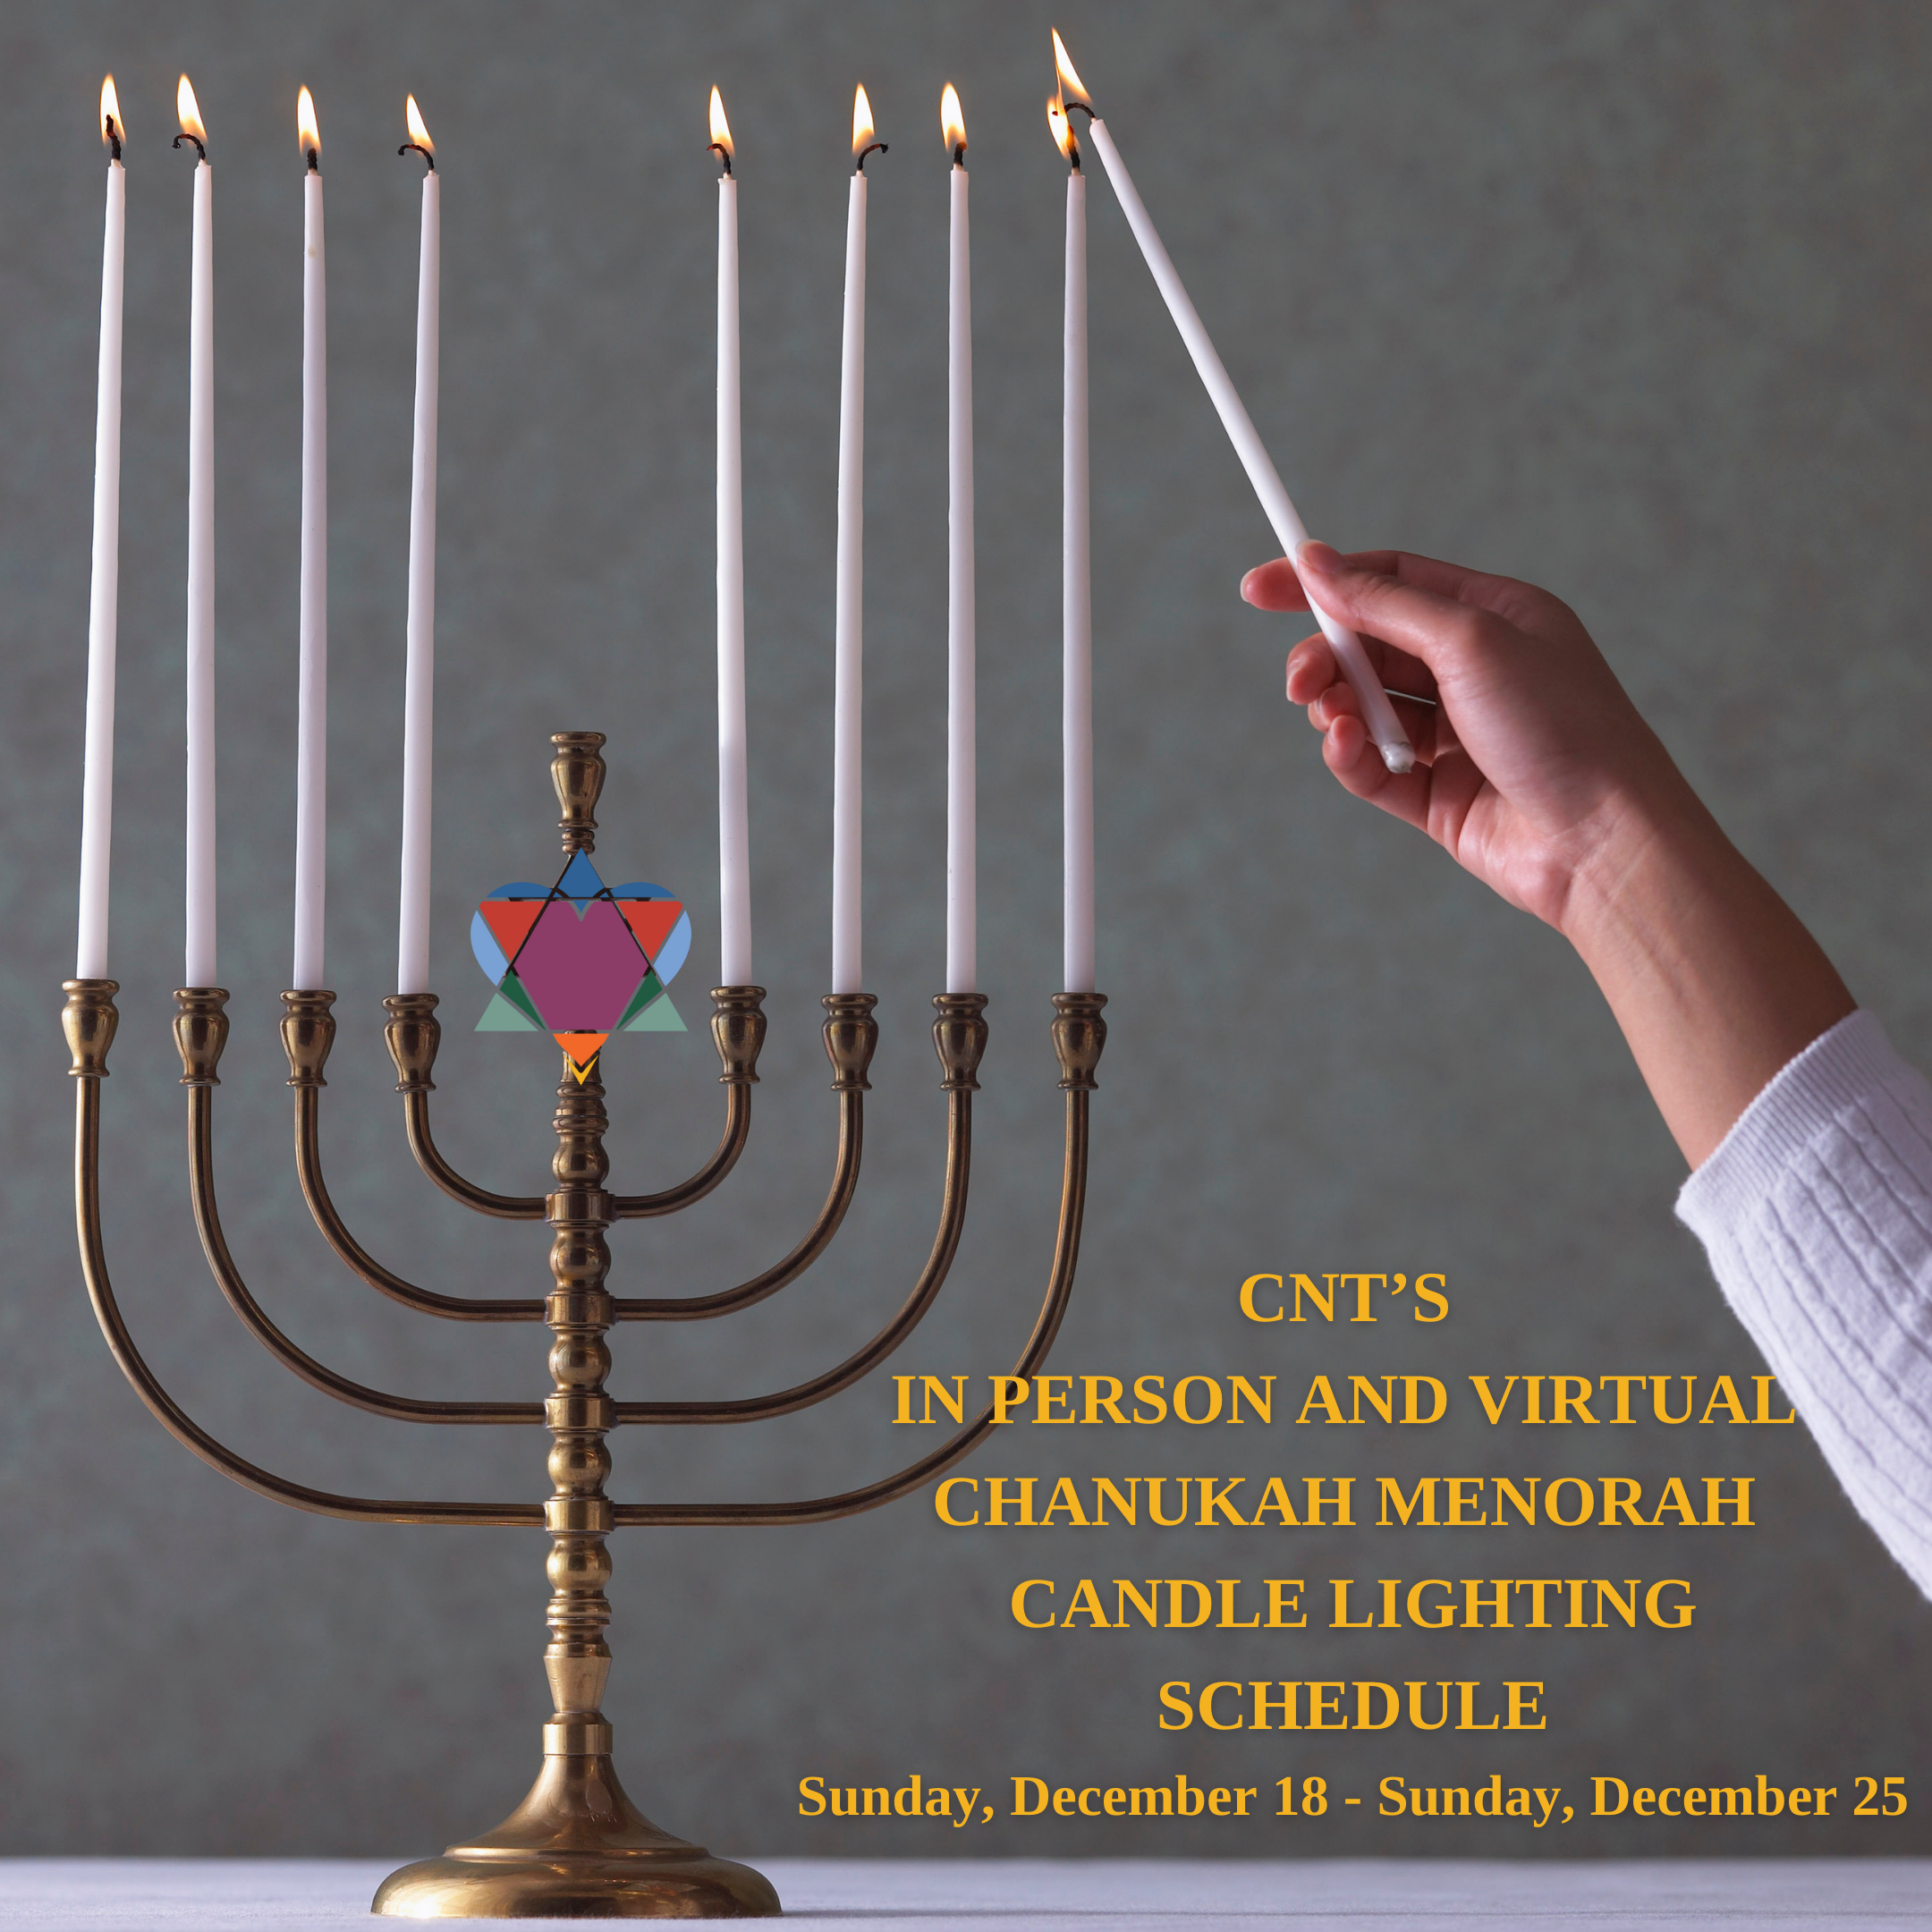 CNT’S IN PERSON AND VIRTUAL CHANUKAH MENORAH CANDLE LIGHTING SCHEDULE - 6:00 PM